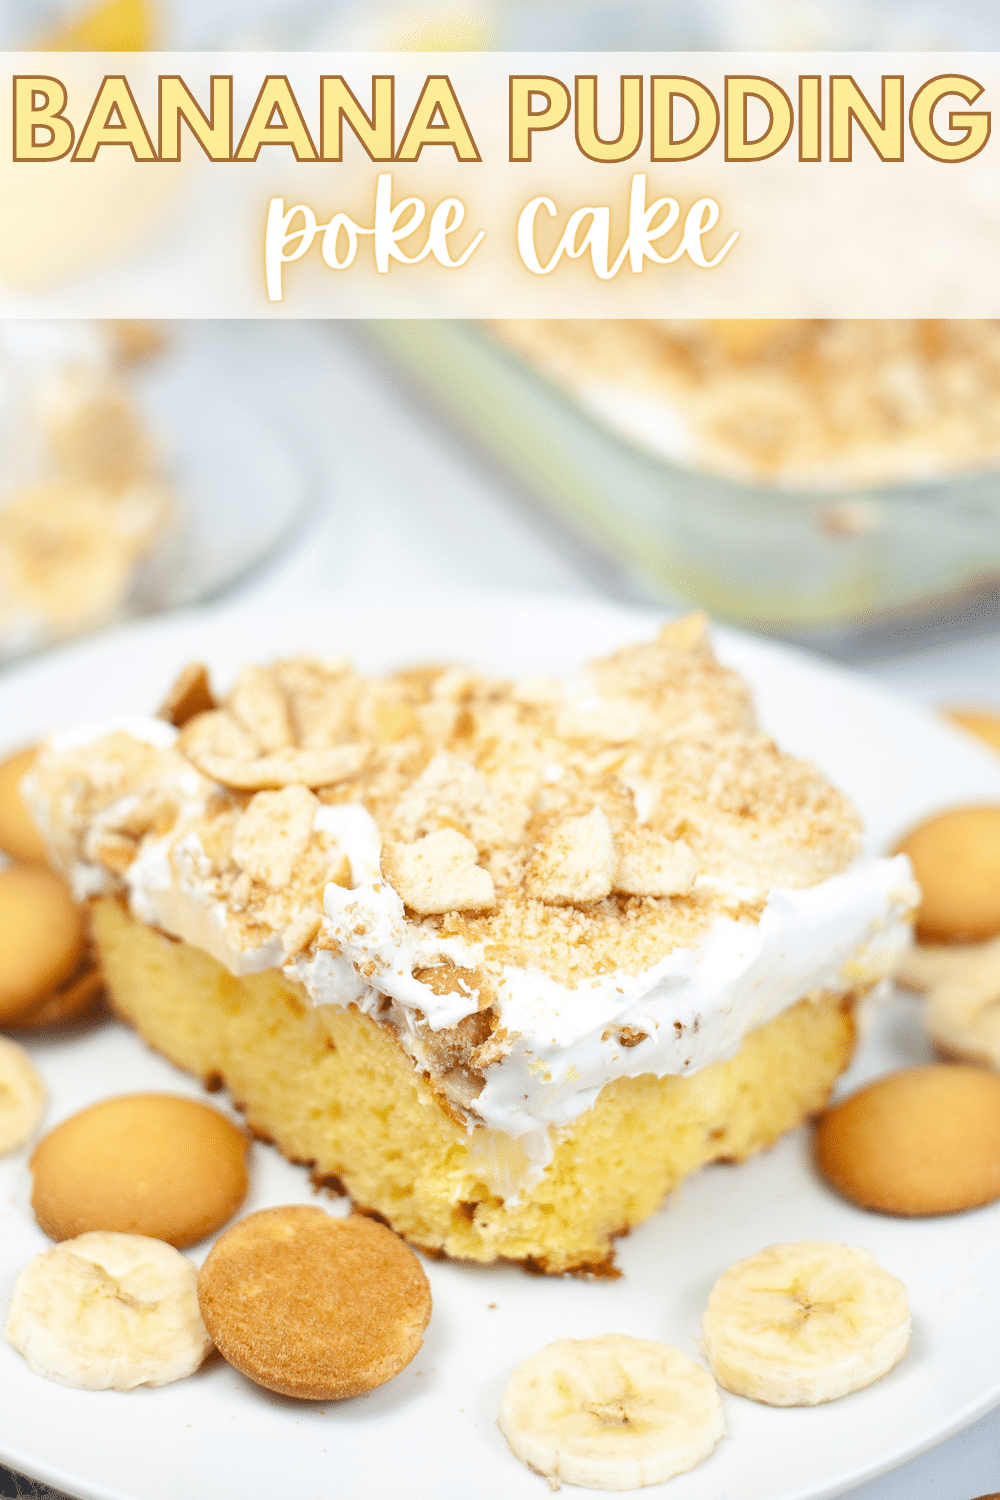 This banana pudding poke cake is a fun version of your favorite traditional banana pudding. All the flavors of banana pudding are here! #bananapudding #pokecake #bananacake #cake #dessert via @wondermomwannab